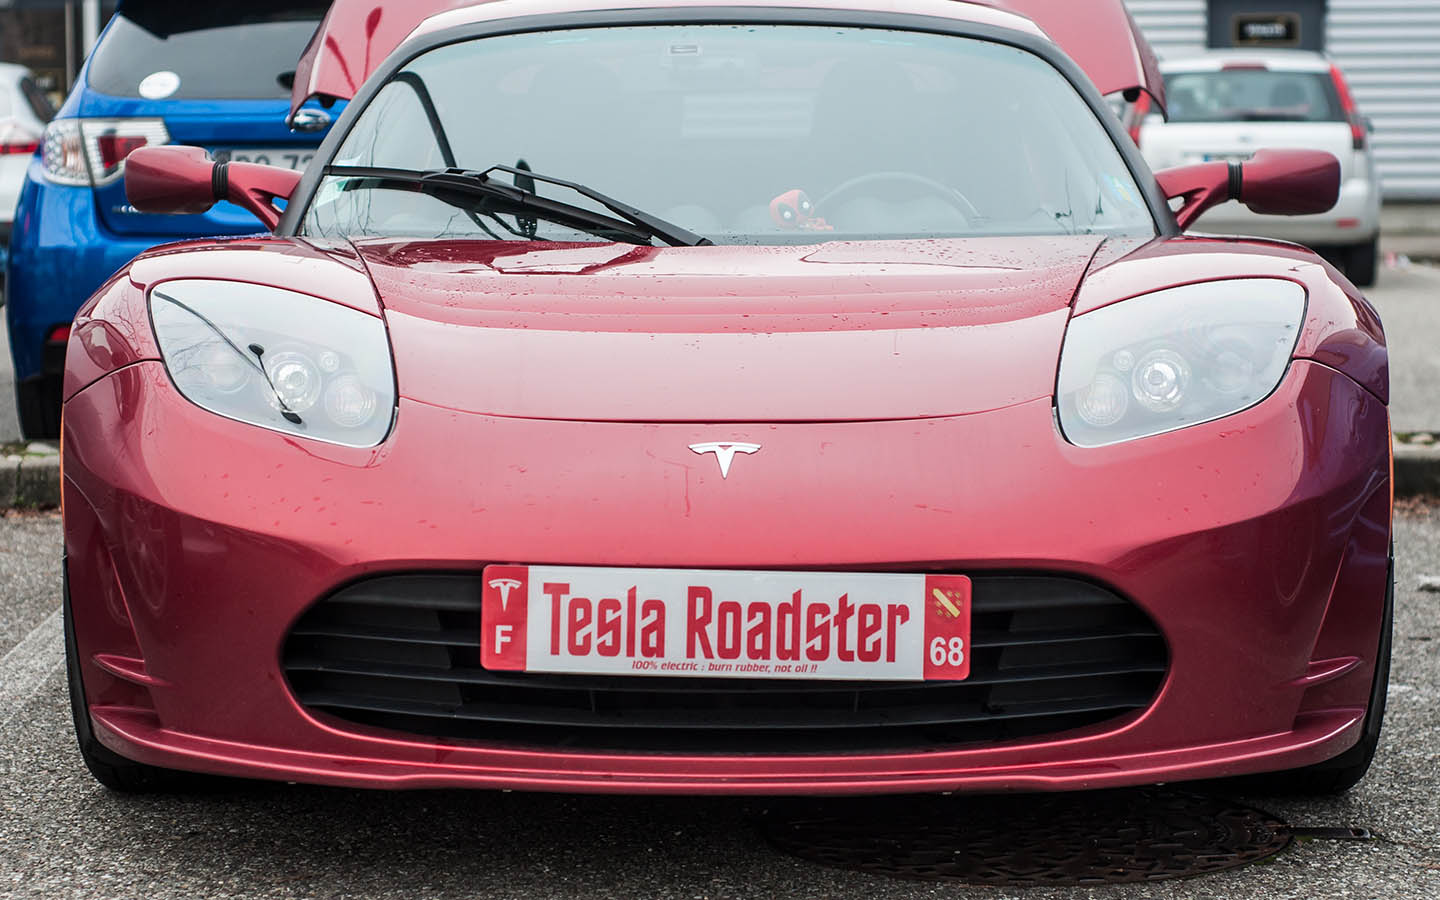 Tesla launched the roadster in 2008